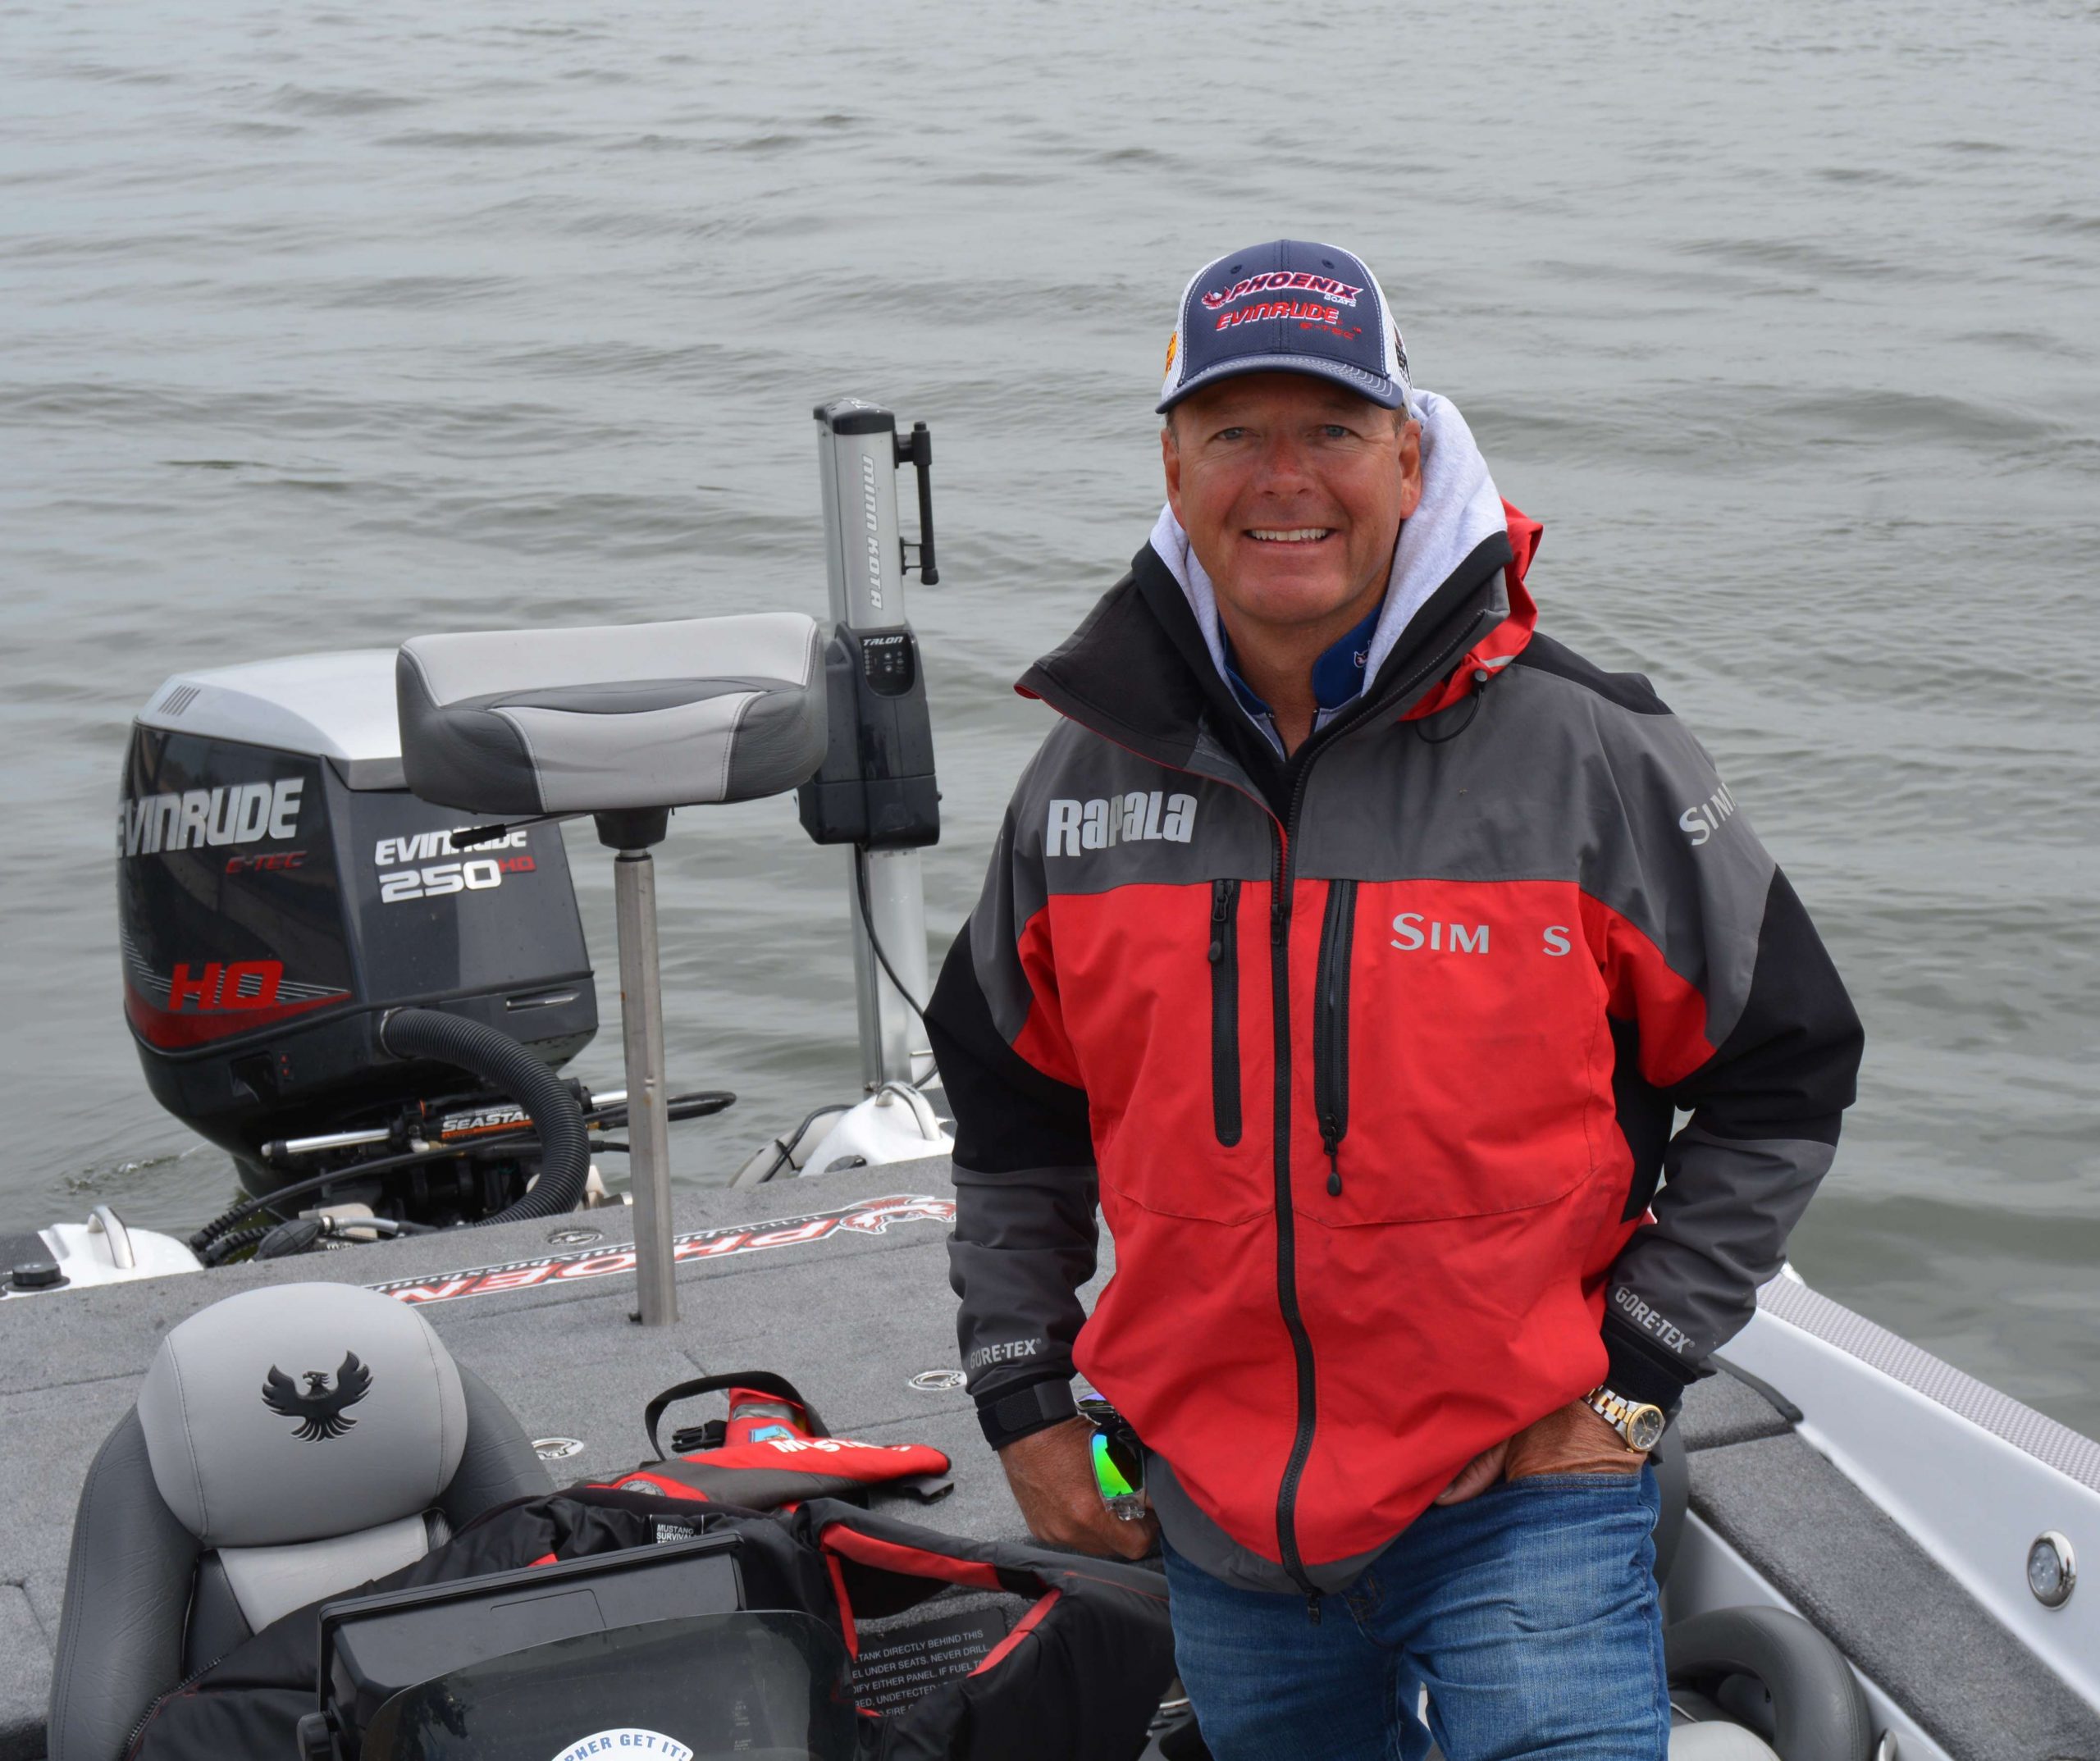 When Davy Hite isn't competing on Day 4, he always does his popular First Look videos with the pros when they come off the water. He'll be doing that today, too, but before he started that, he went out on the water to see how the Top 12 were doing.